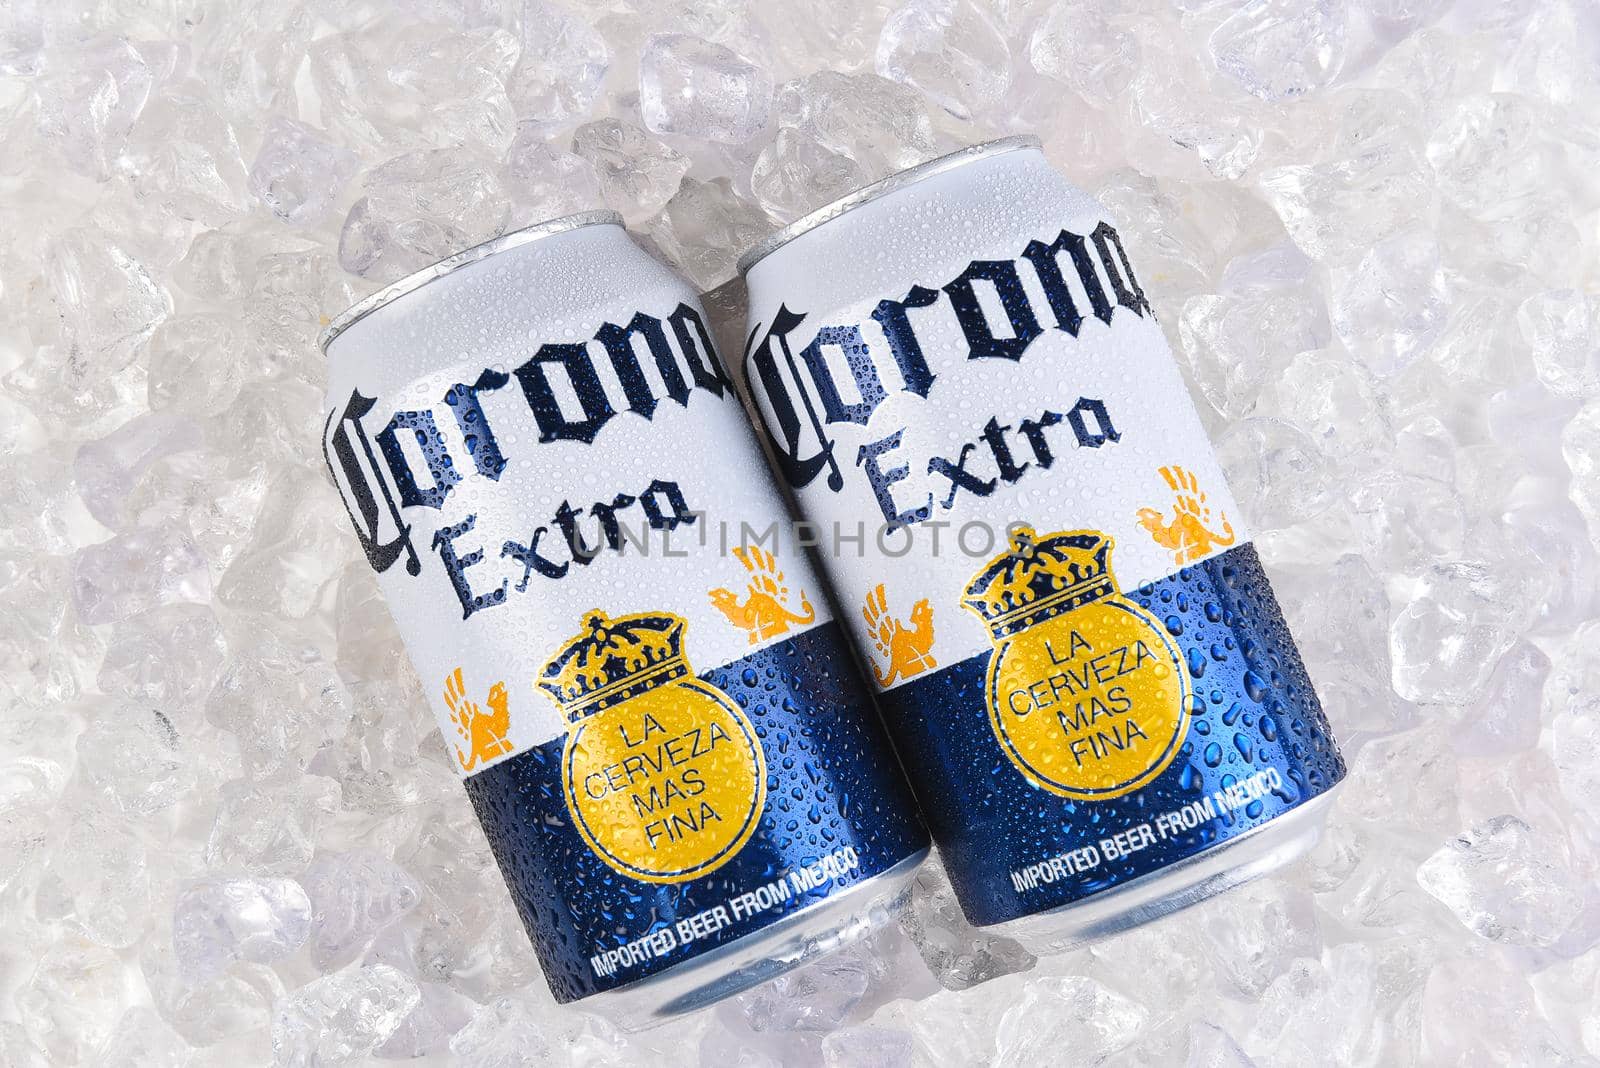 IRVINE, CALIFORNIA - MARCH 21, 2018: two 12 ounce cans of Corona Extra Cerveza on ice. Corona Extra is a pale lager produced by Cerveceria Modelo in Mexico for domestic distribution and export.